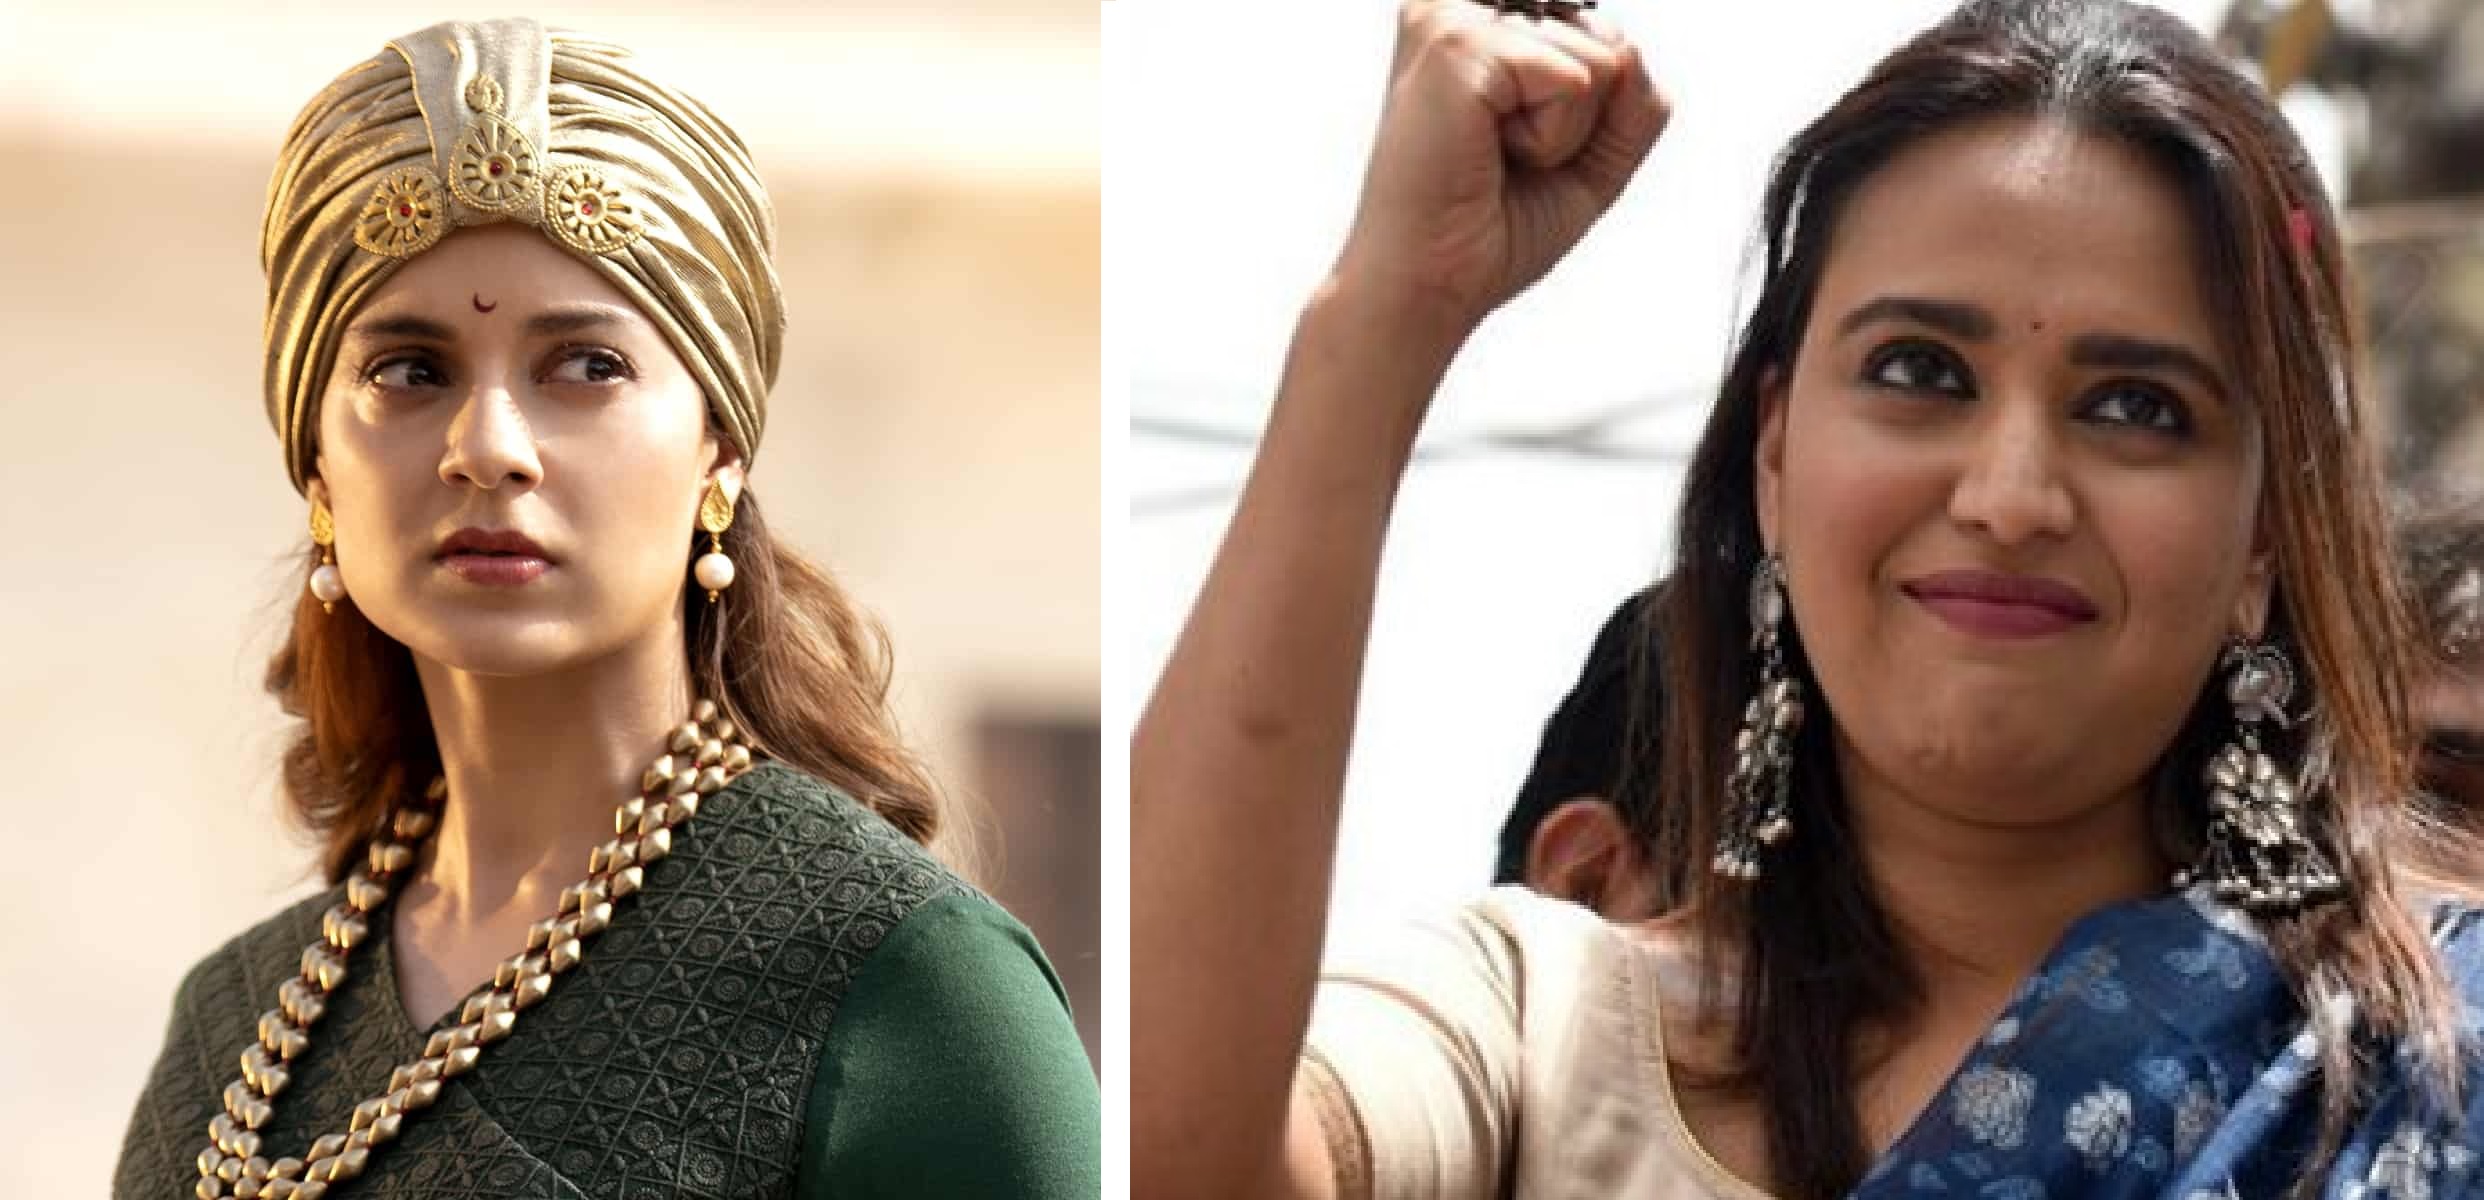 Swara Bhaskar Can’t Stop Laughing After Kangana Ranaut’s Office Demolition is Called ‘Death Of Democracy’, It Seems